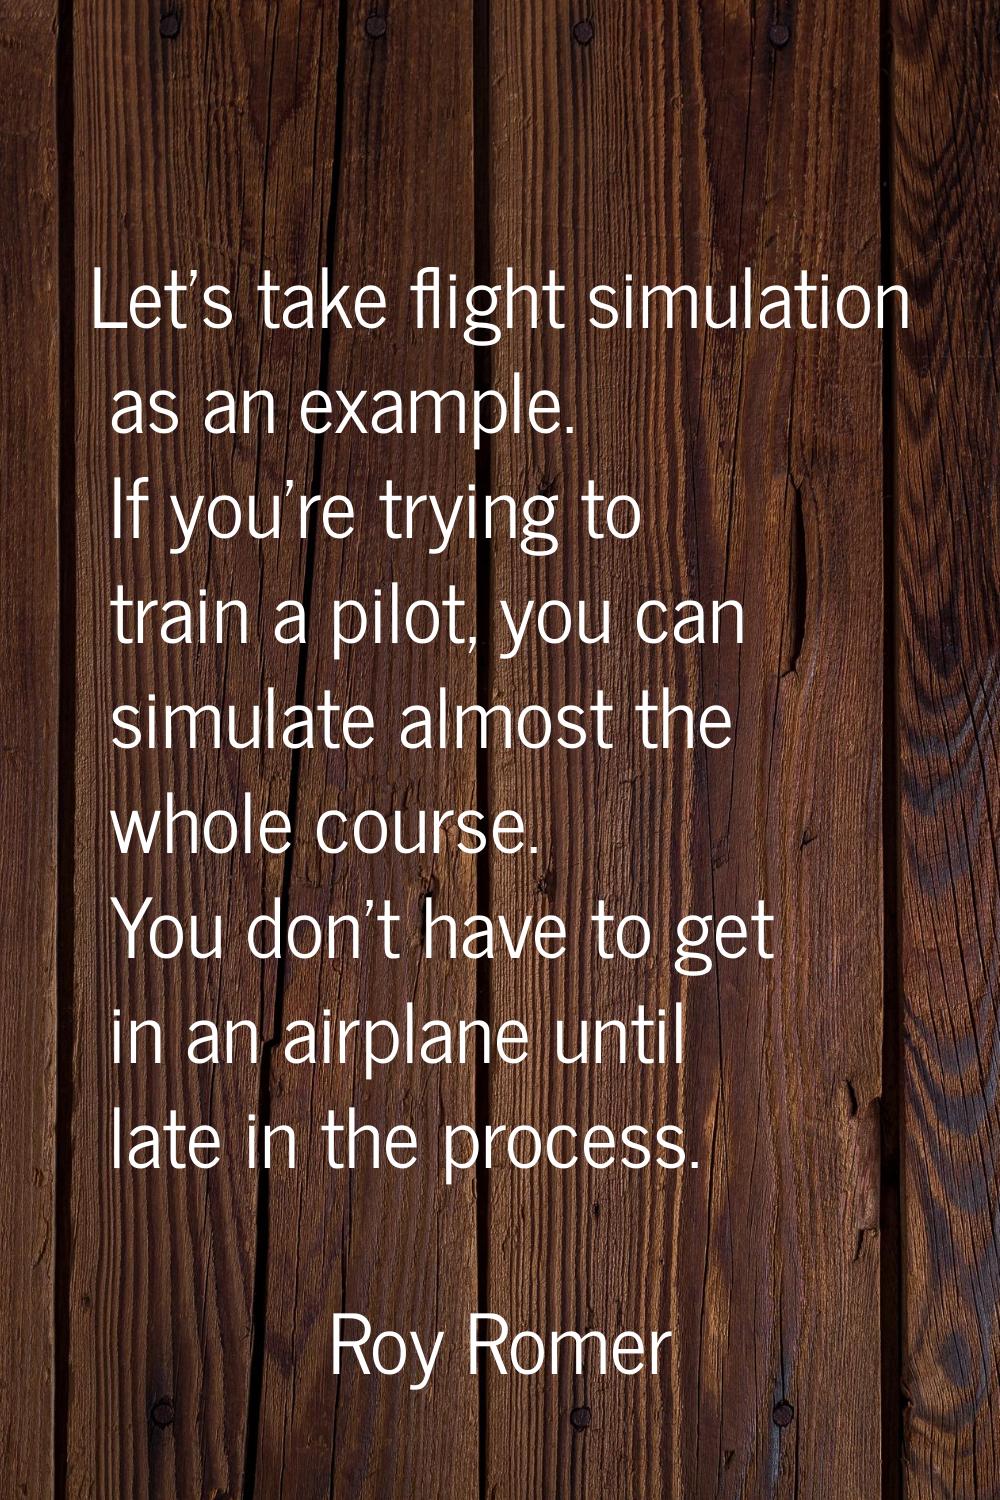 Let's take flight simulation as an example. If you're trying to train a pilot, you can simulate alm